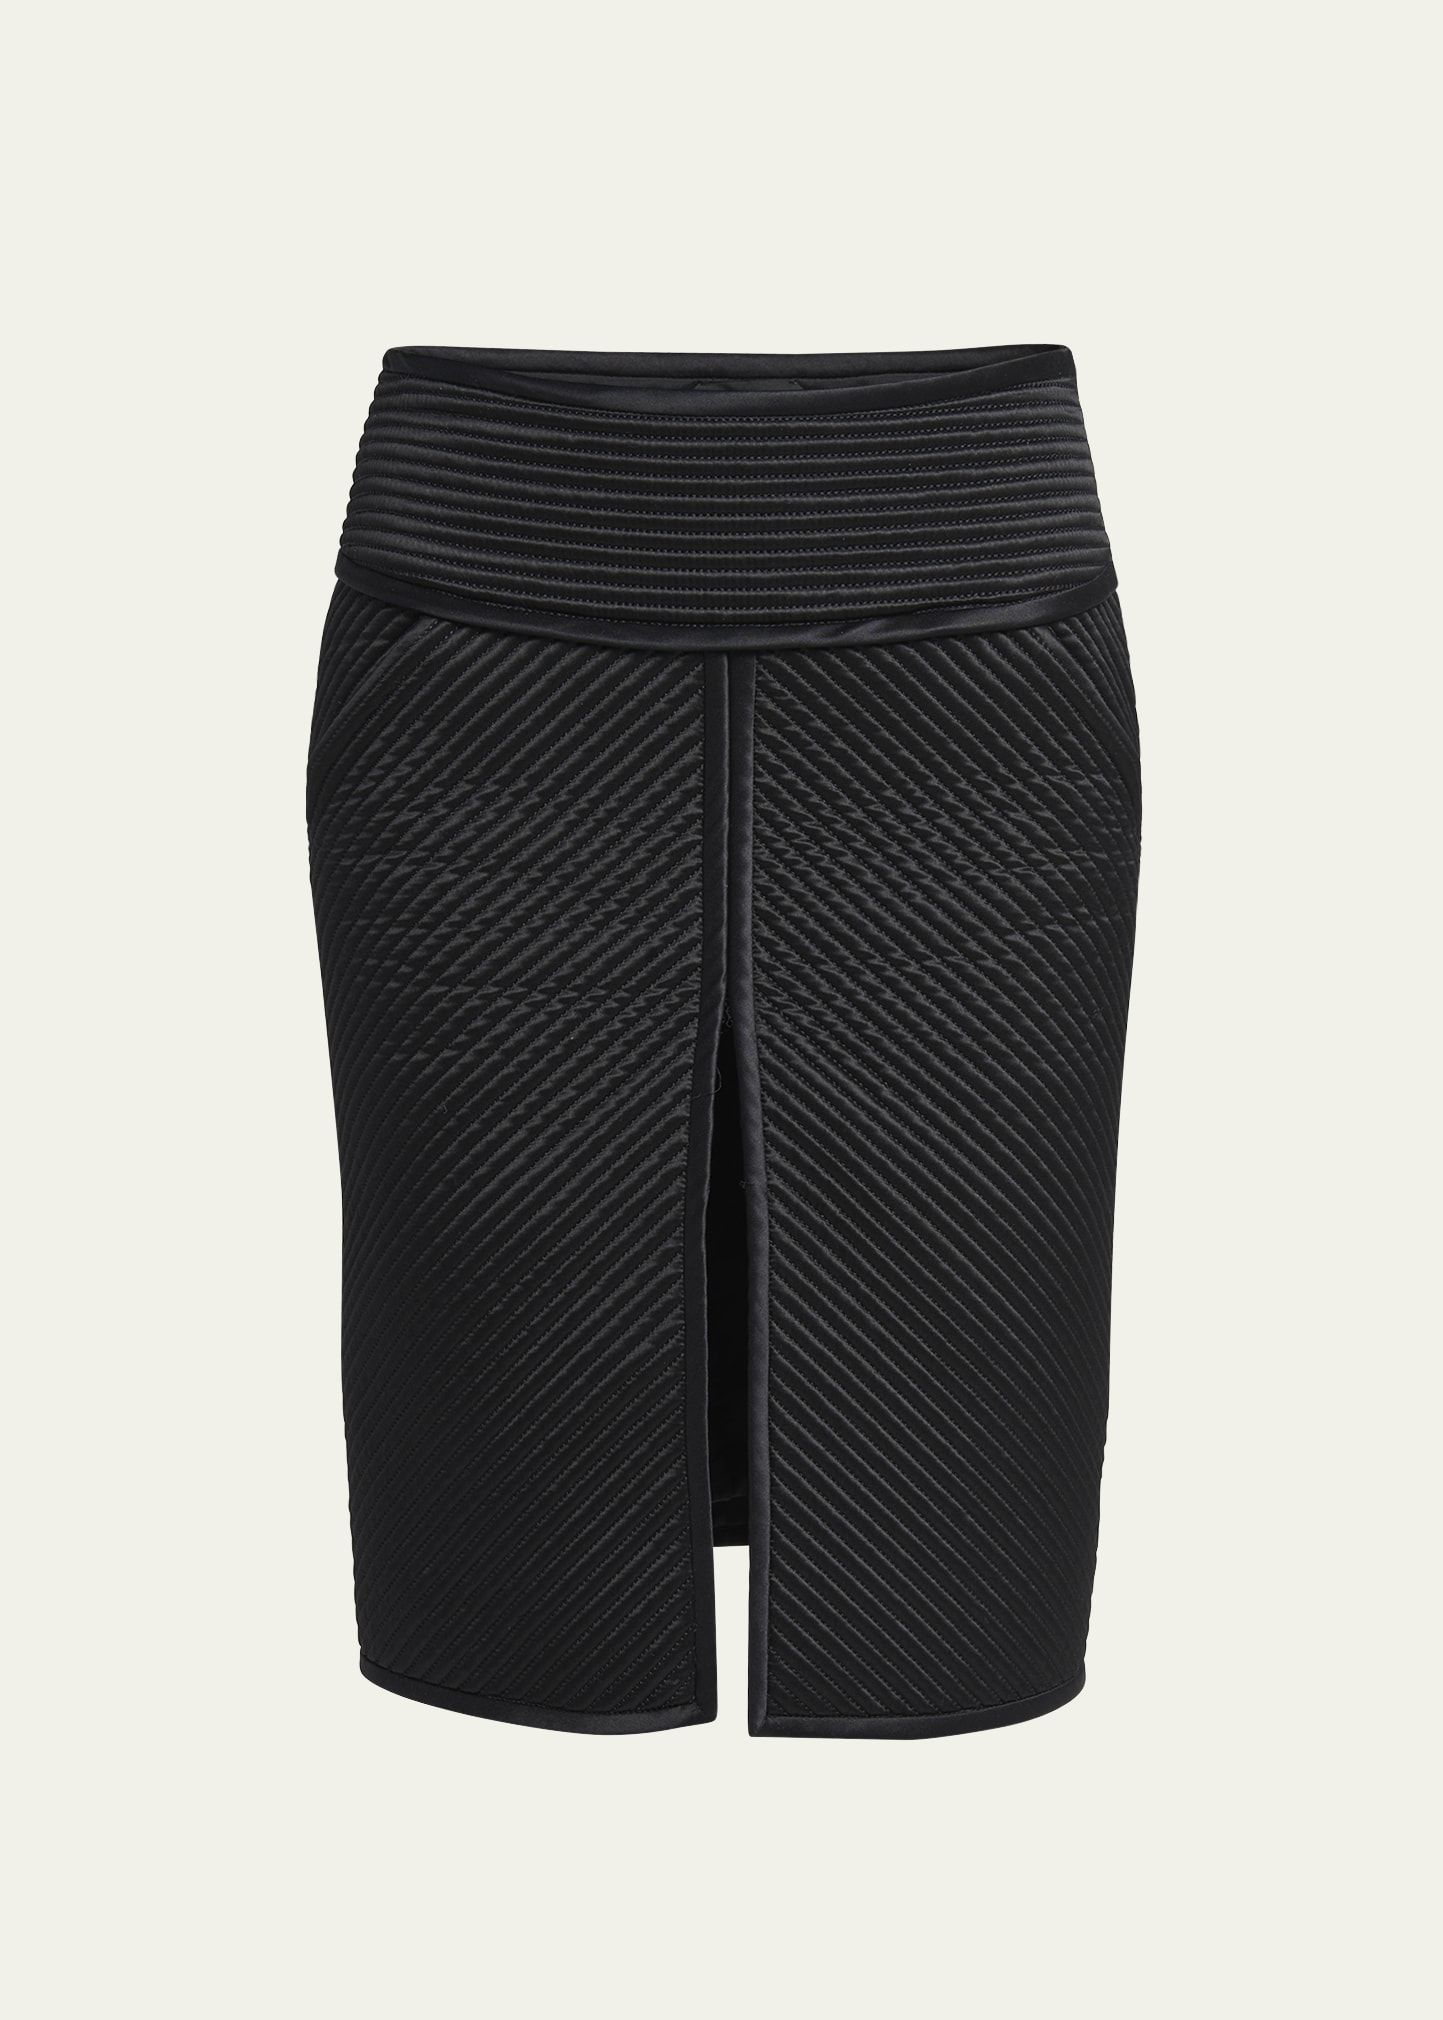 TOM FORD Pinstripe Quilted Satin Pencil Skirt | Bergdorf Goodman